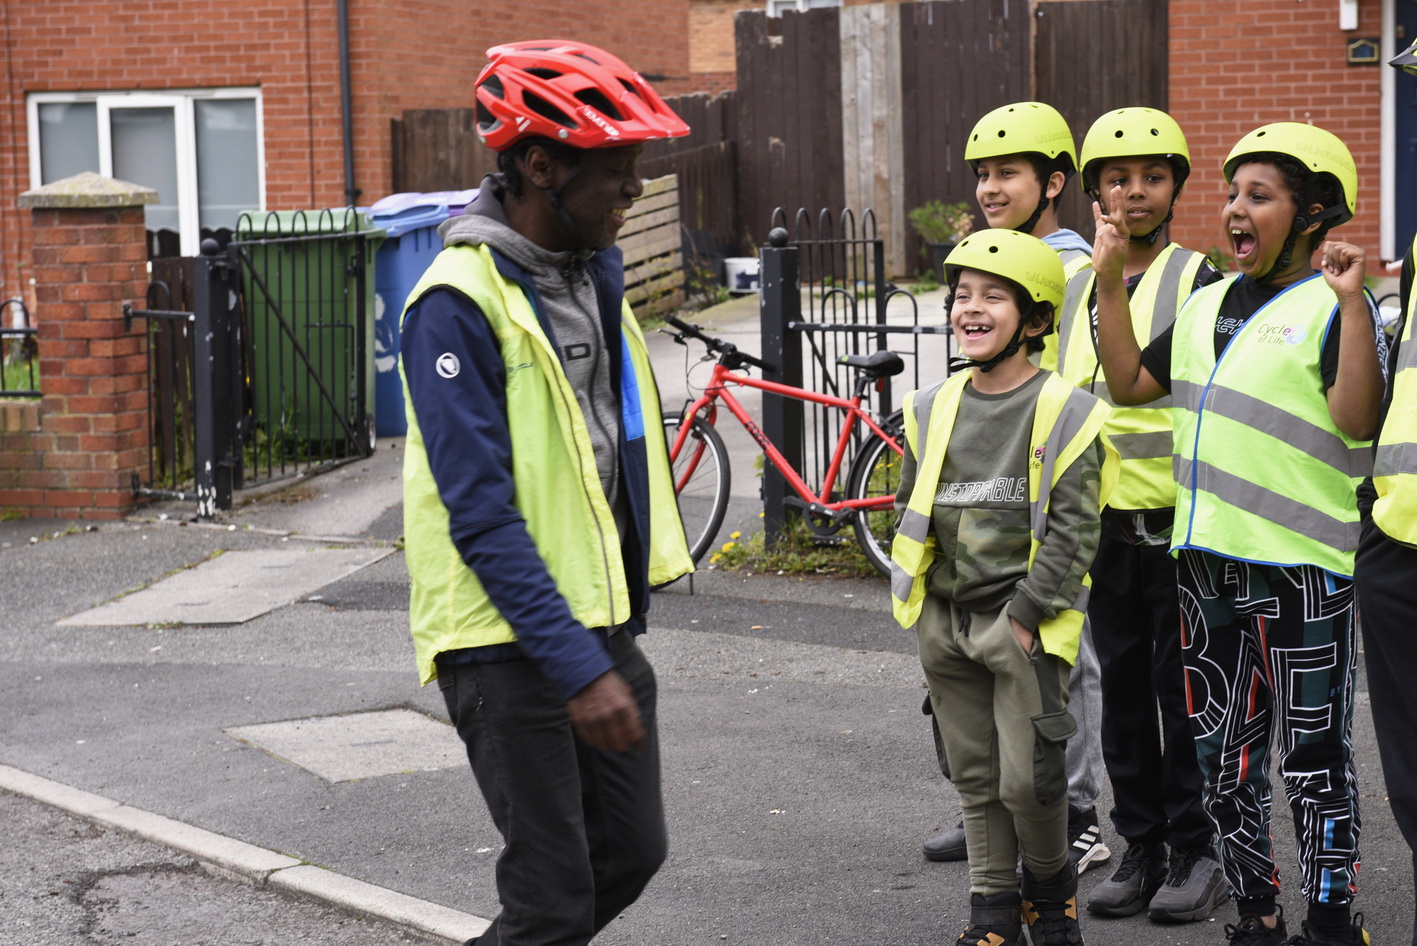 A group of trainees chatting with their Bikeability instructor